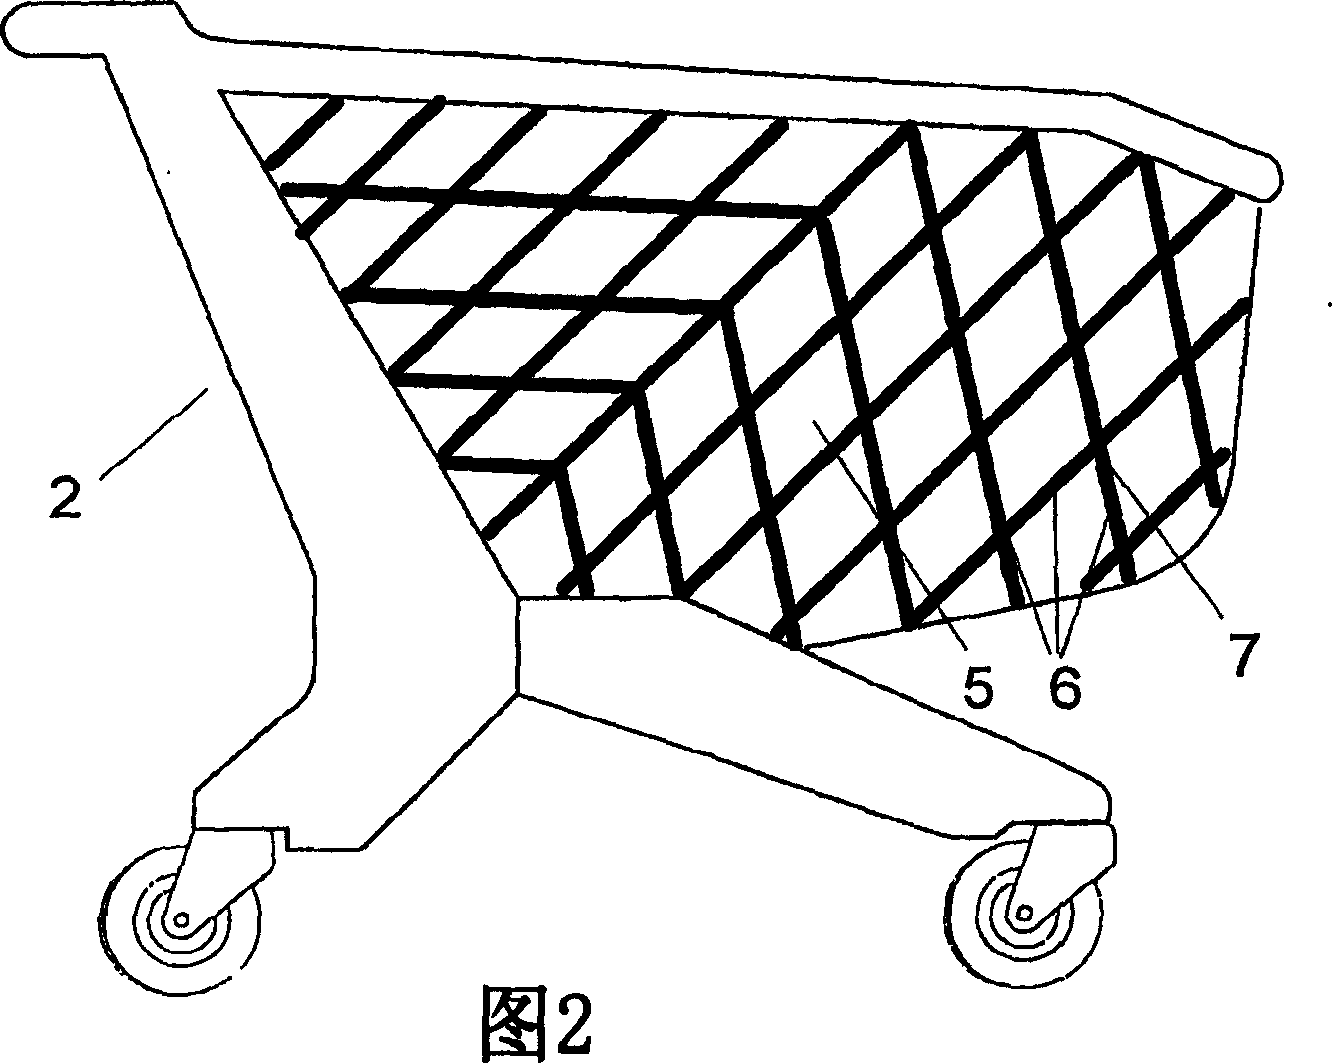 Shopping cart or transport container